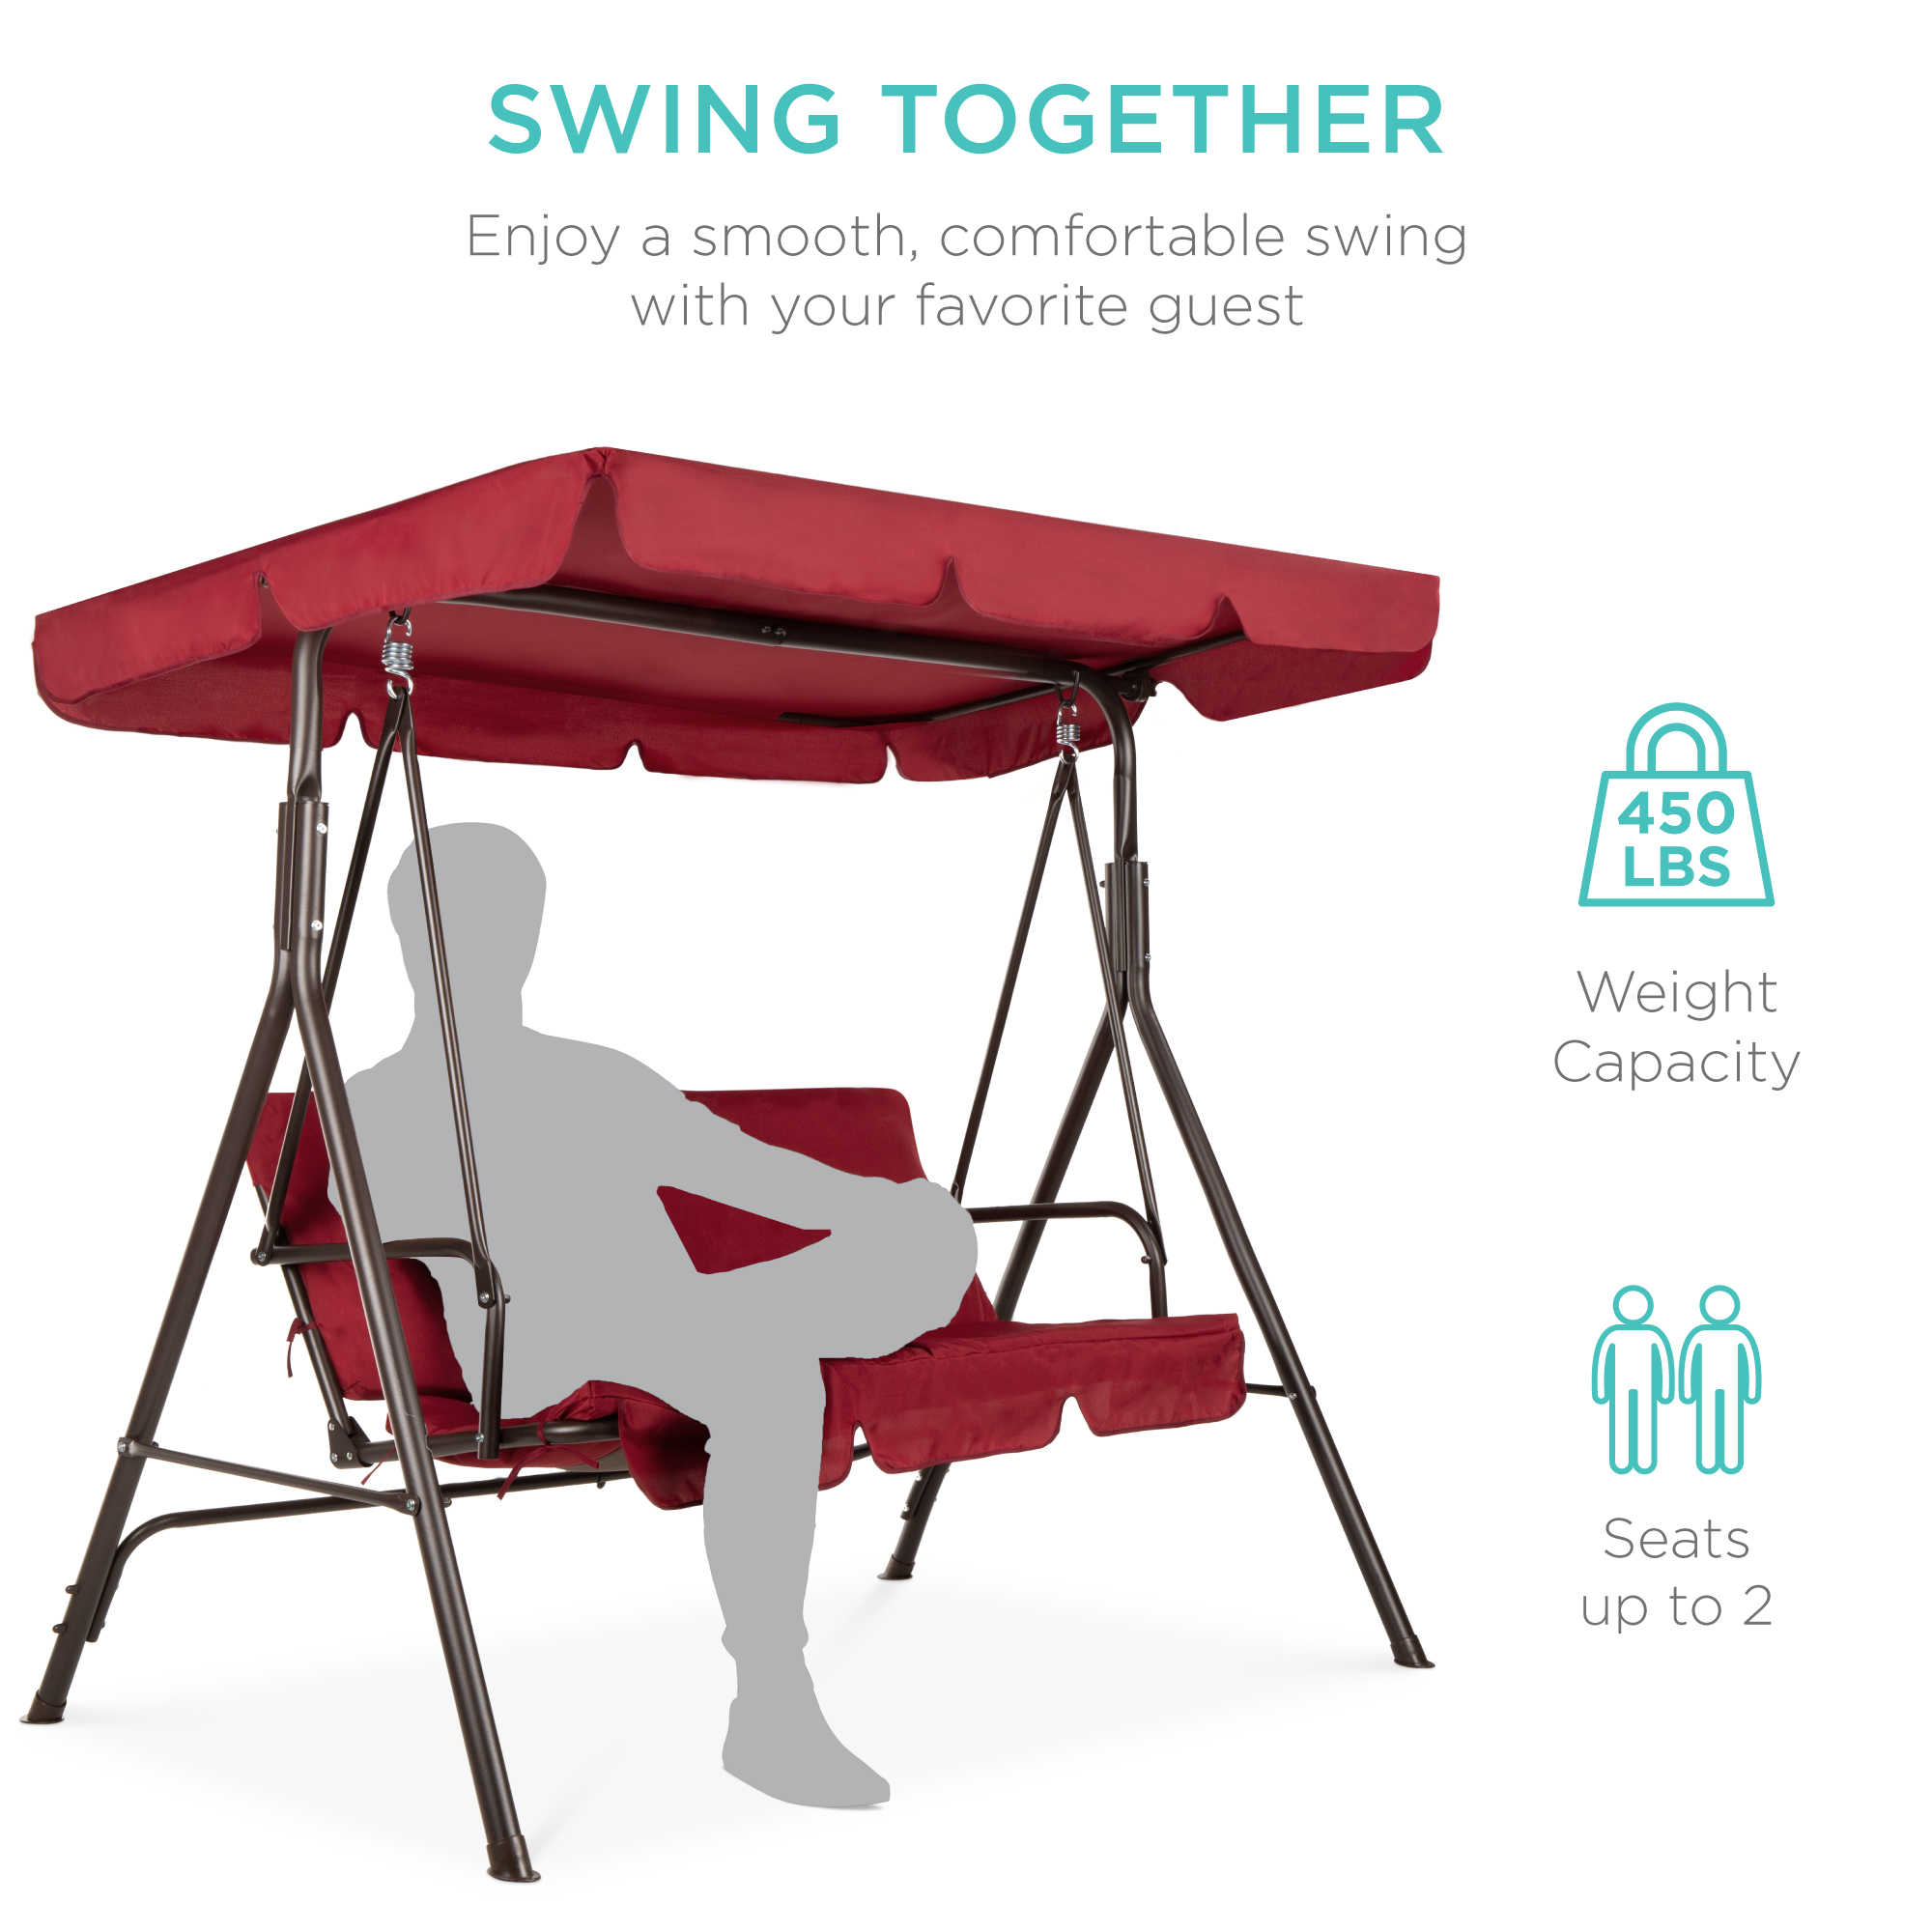 Best Choice Products 2-Person Outdoor Convertible Canopy Swing Glider Lounge Chair w/ Removable Cushions - Burgundy - image 2 of 7